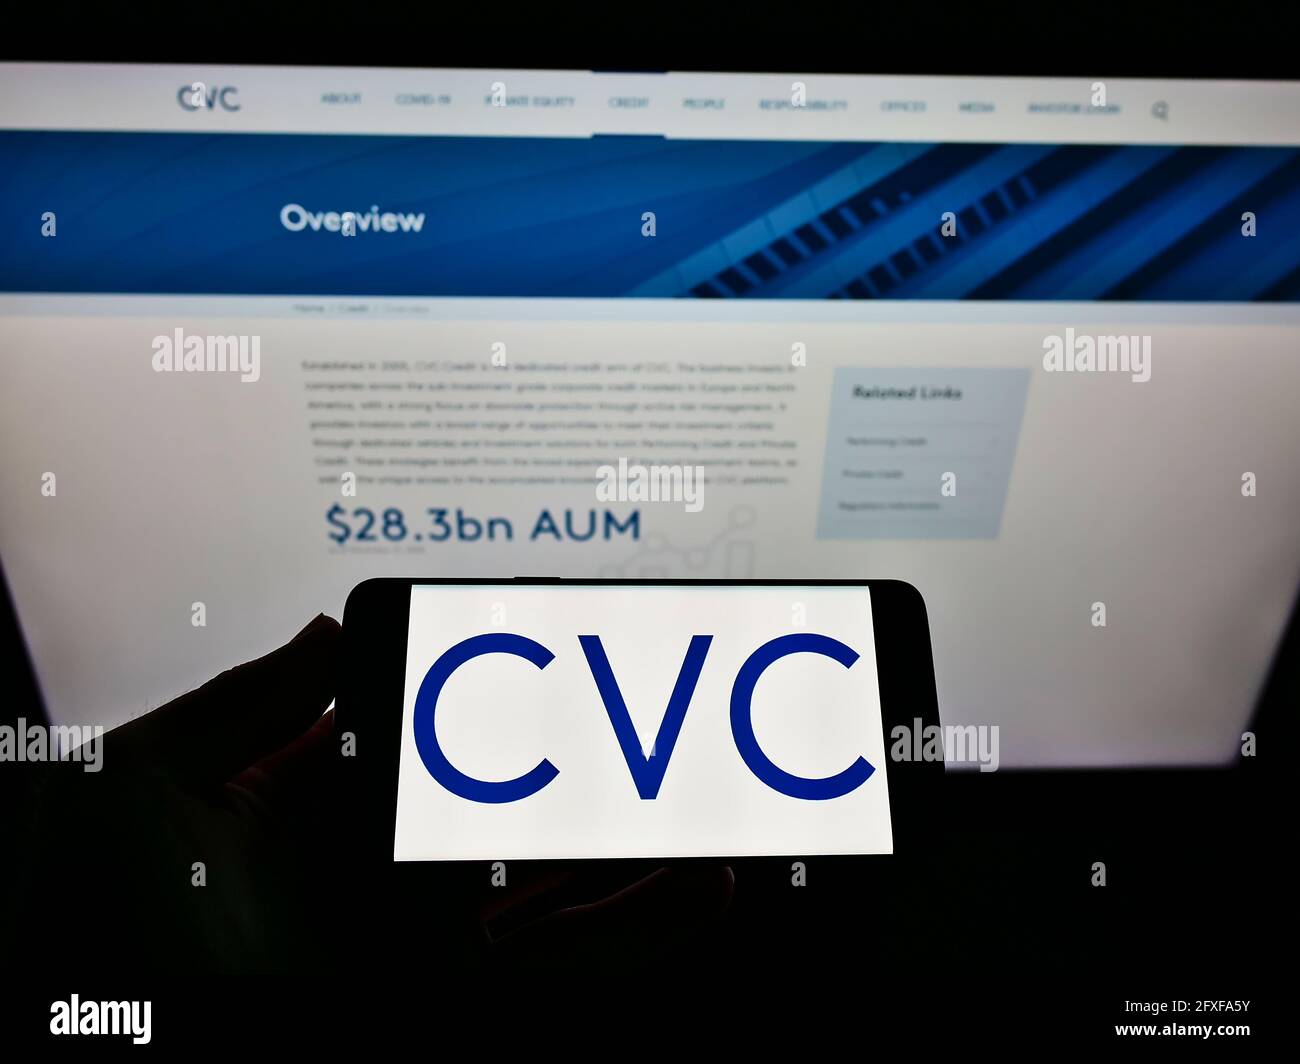 Person holding smartphone with business logo of private equity company CVC Capital Partners on screen in front of website. Focus on phone display. Stock Photo